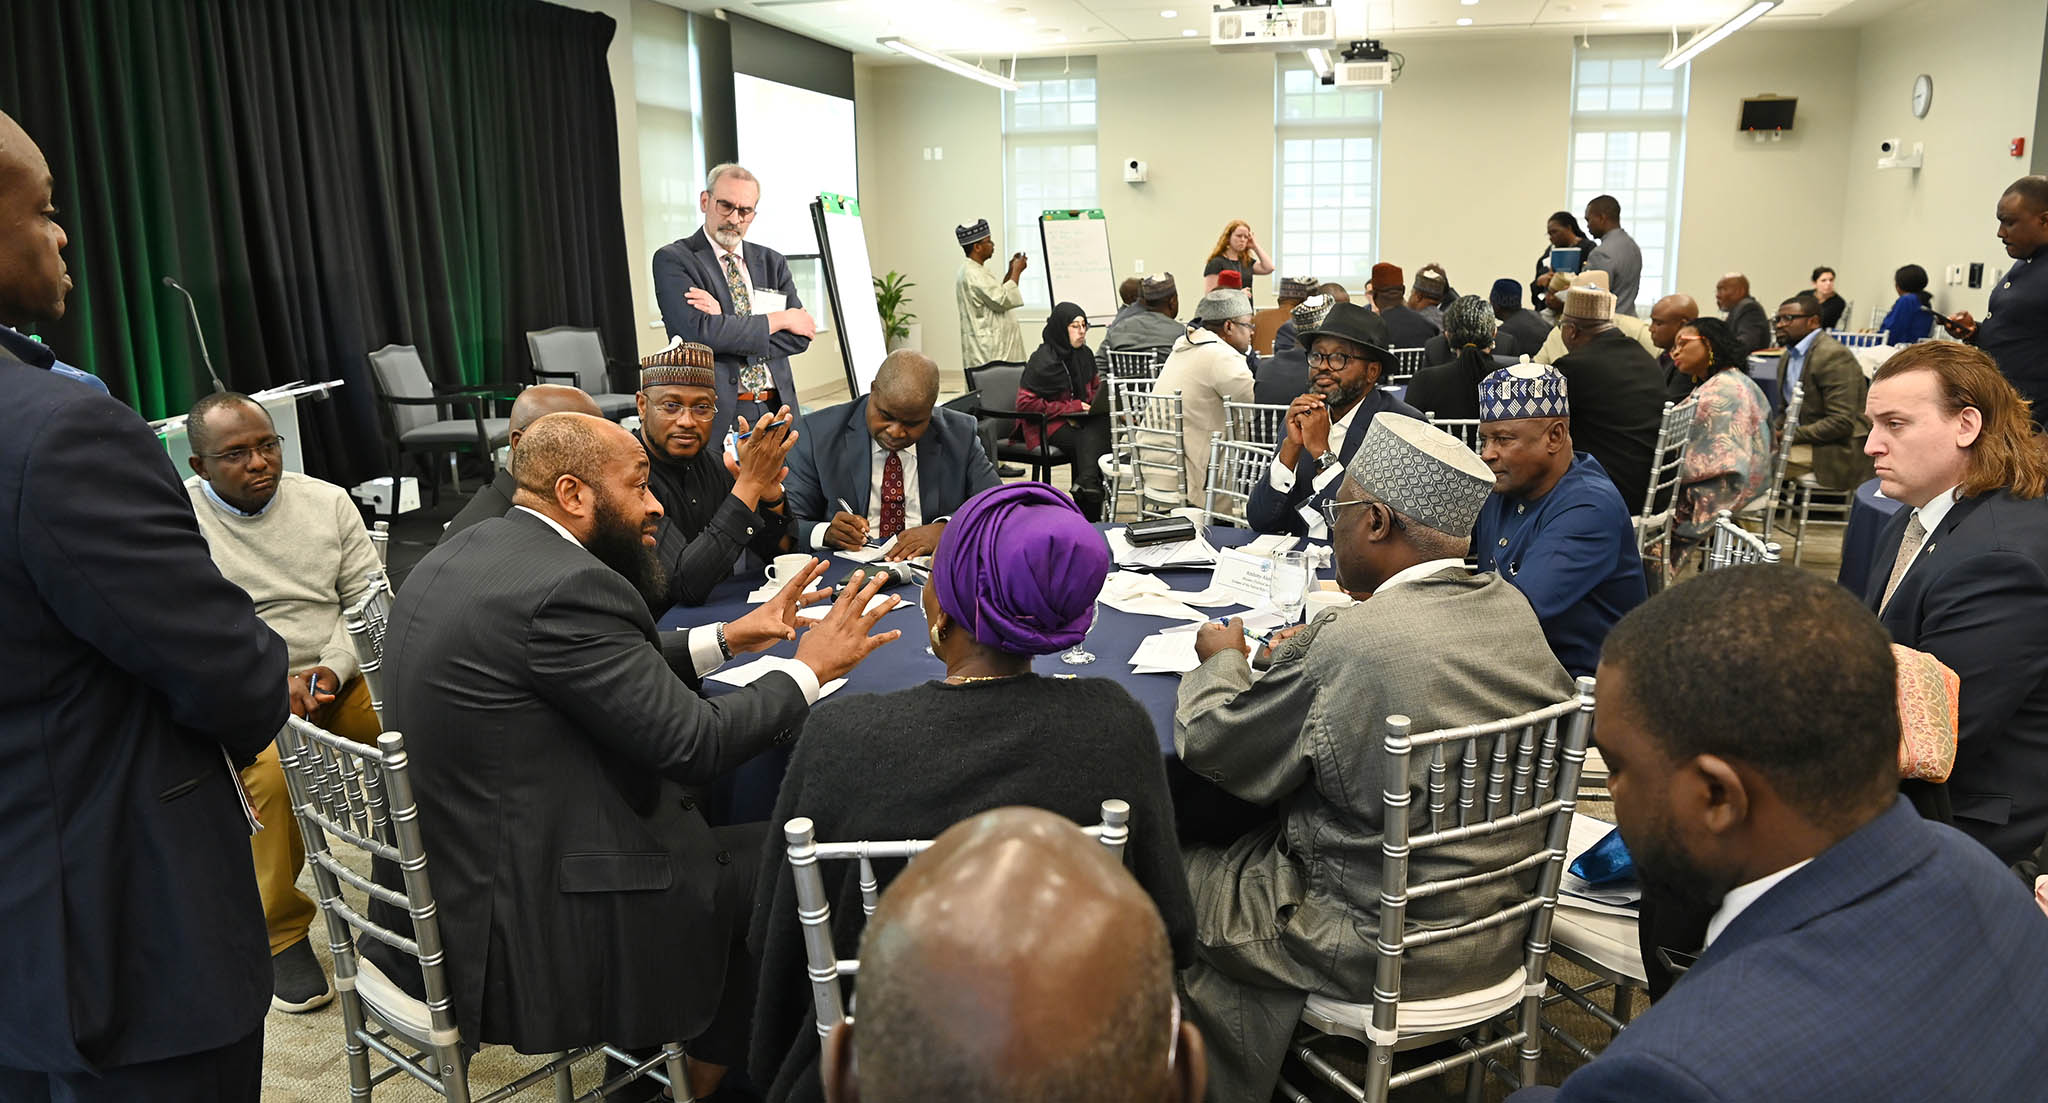 Niger state Governor Mohammed Umar Bago, left foreground, makes a point to fellow governors, officials and experts in a USIP symposium on ways to use U.S. partnership, and peacebuilding approaches, to address Nigeria’s crises and bolster stability.